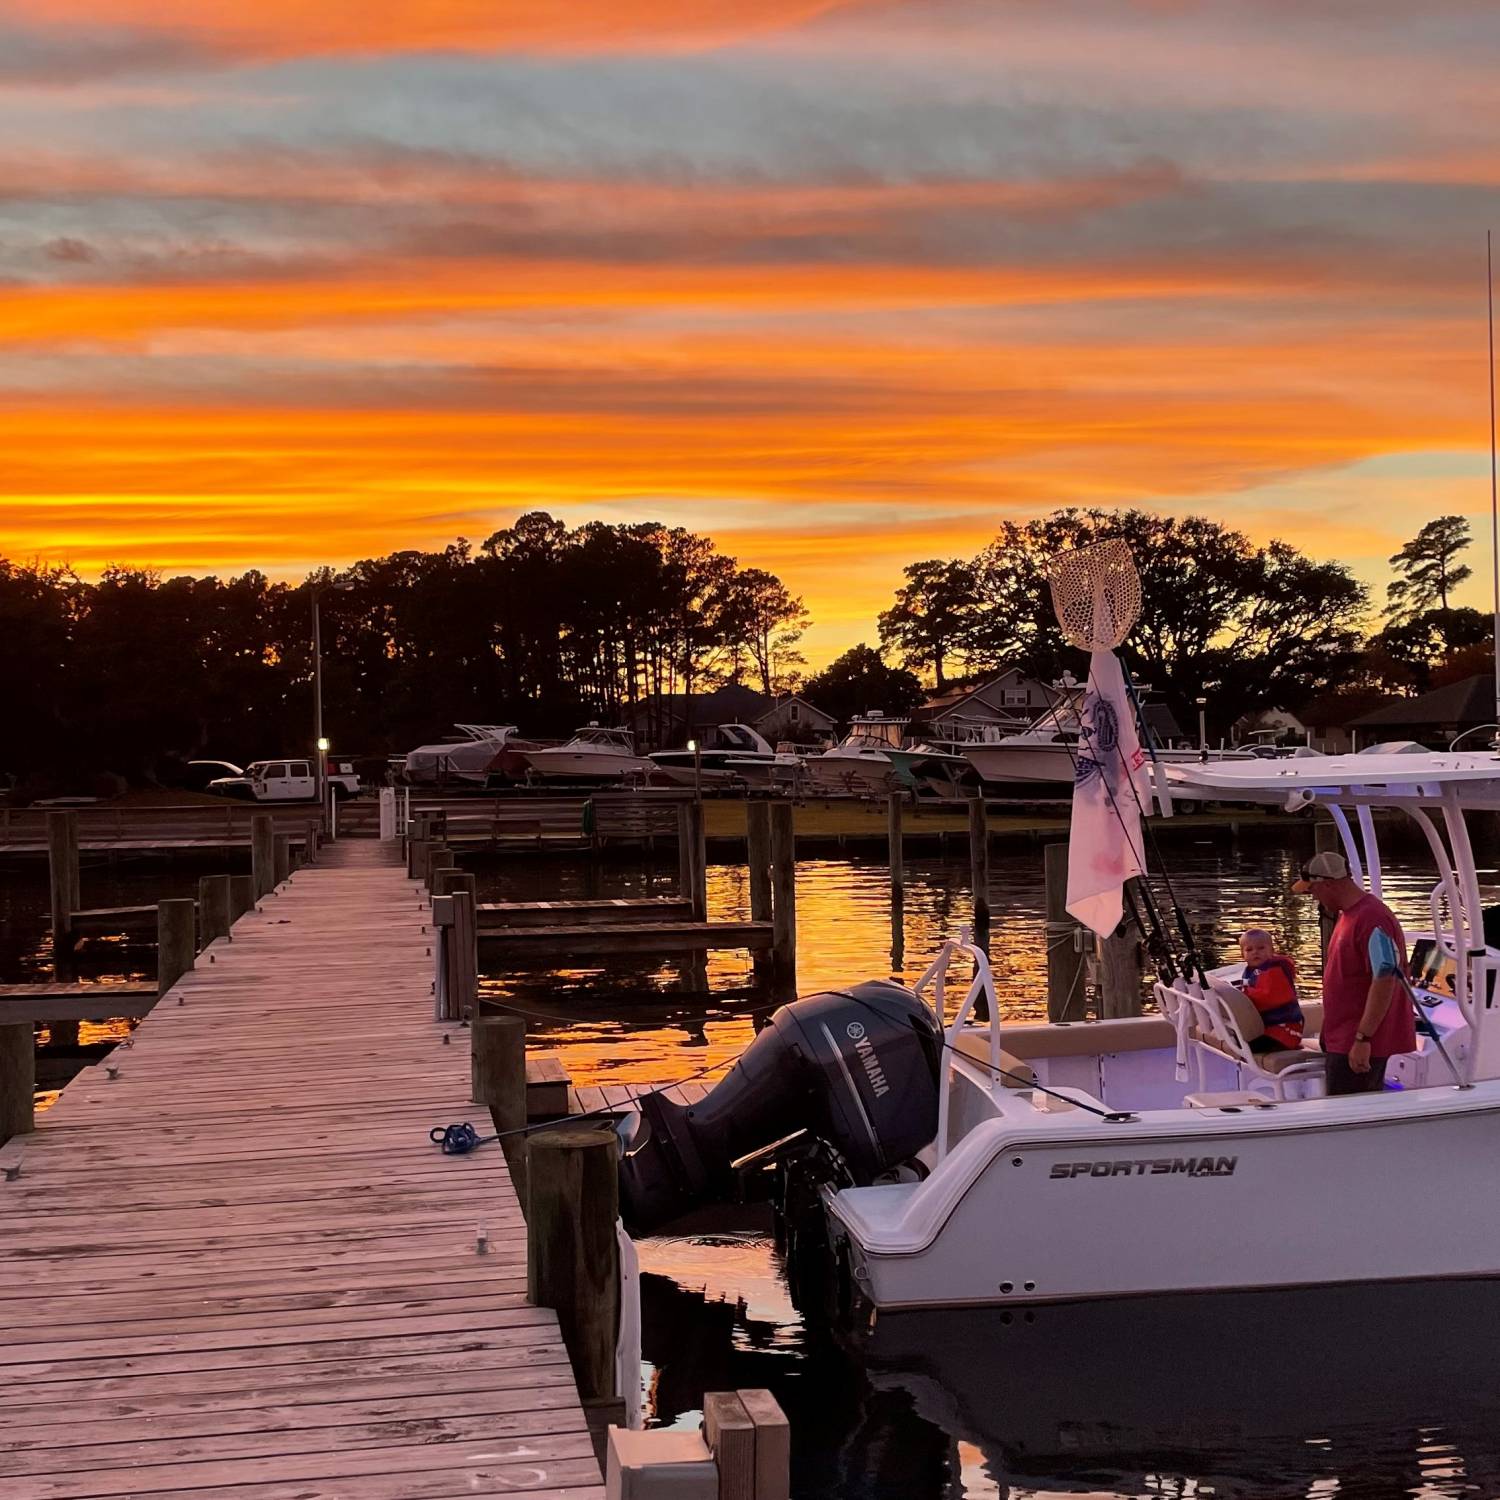 Title: Veterans Day Getaway! - On board their Sportsman Open 232 Center Console - Location: Kitty Hawk, NC. Participating in the Photo Contest #SportsmanDecember